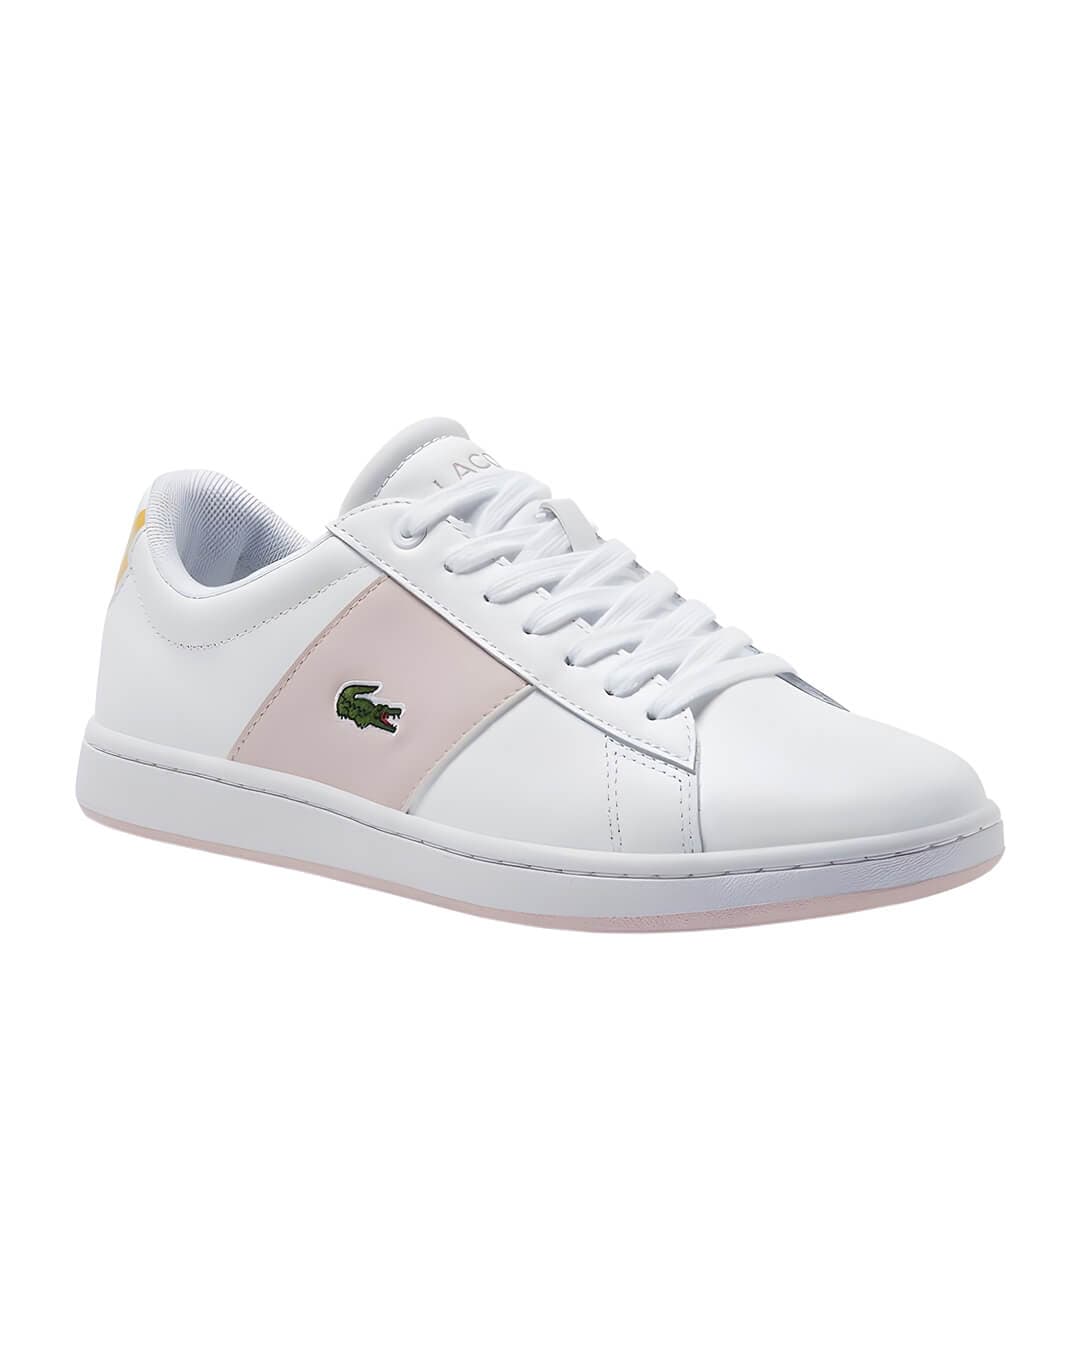 Lacoste Shoes Lacoste Carnaby Pink And White Sneakers